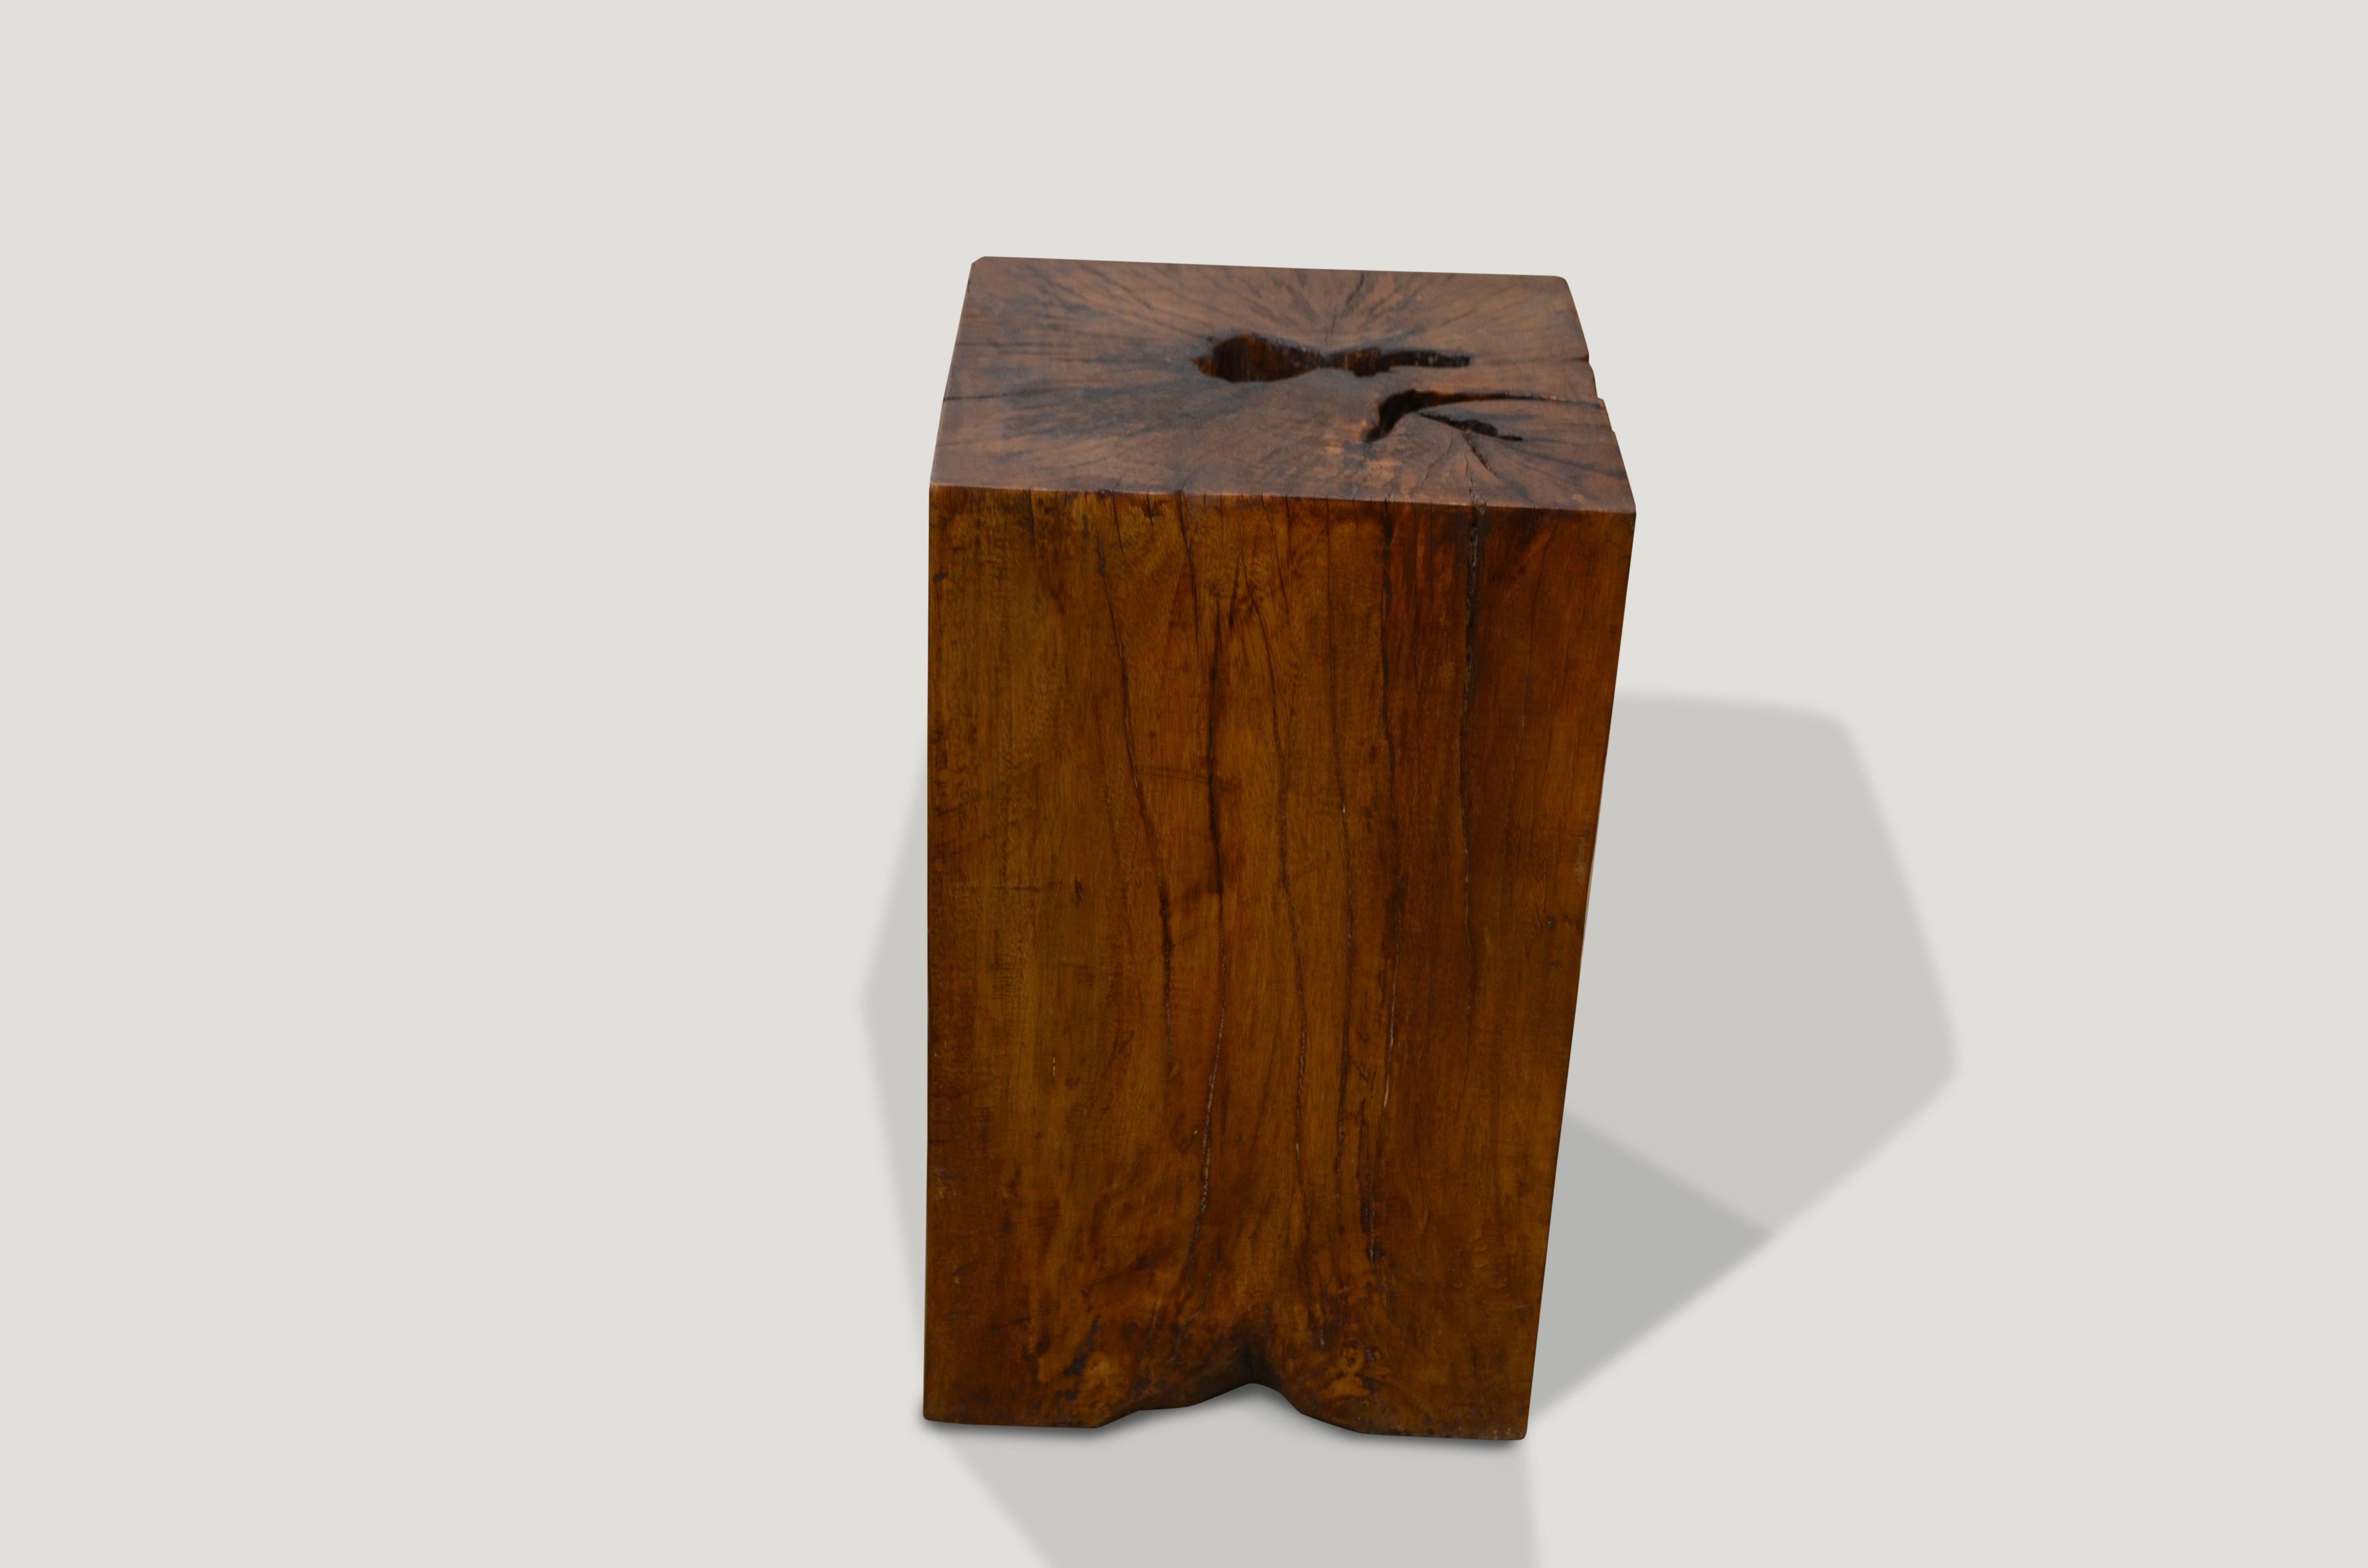 Reclaimed tamarind wood side table with a brown stain and oil finish. Organic is the new modern.

Andrianna Shamaris. The Leader In Modern Organic Design.